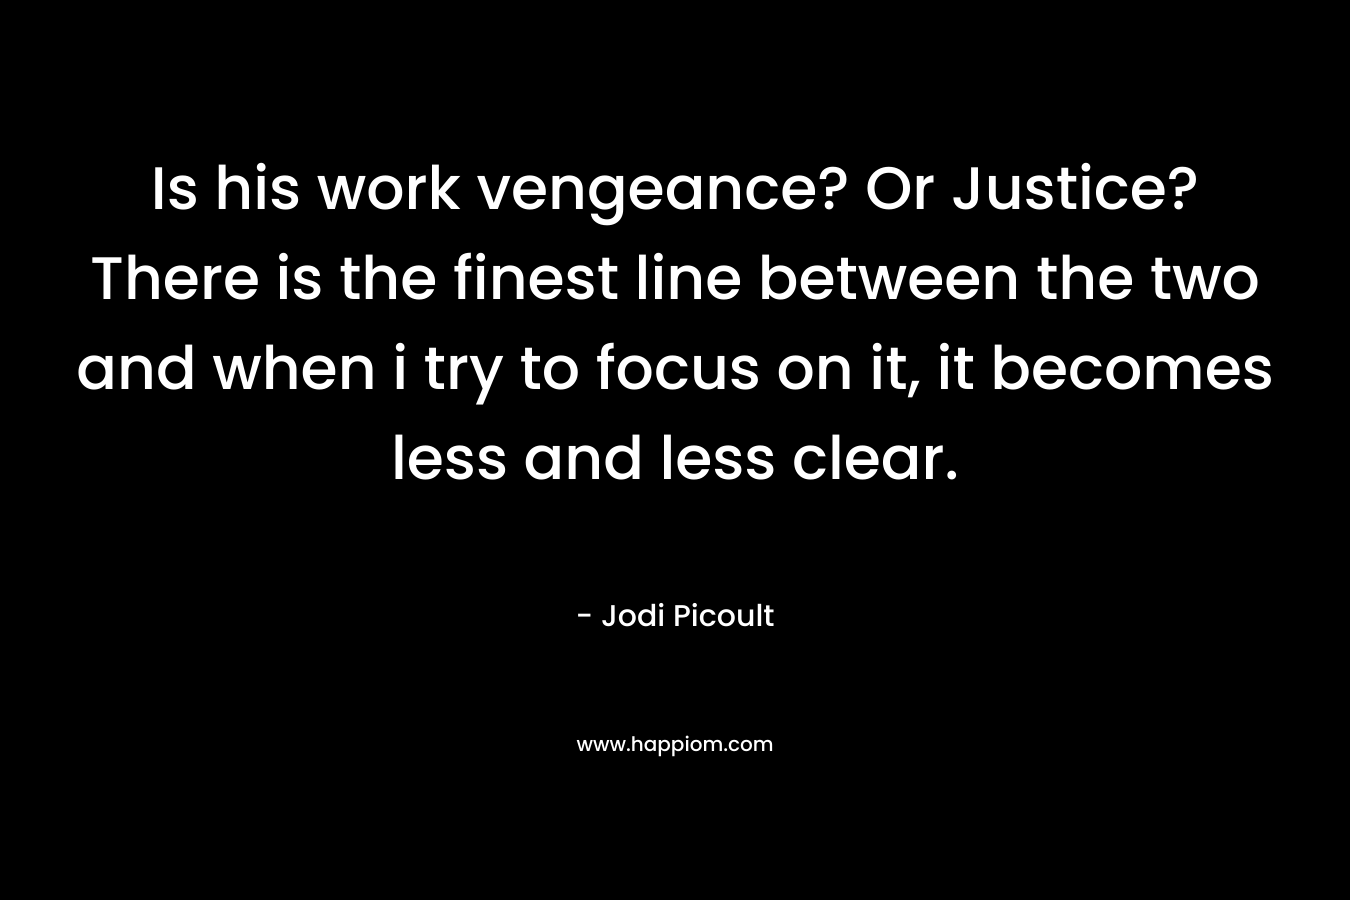 Is his work vengeance? Or Justice? There is the finest line between the two and when i try to focus on it, it becomes less and less clear.